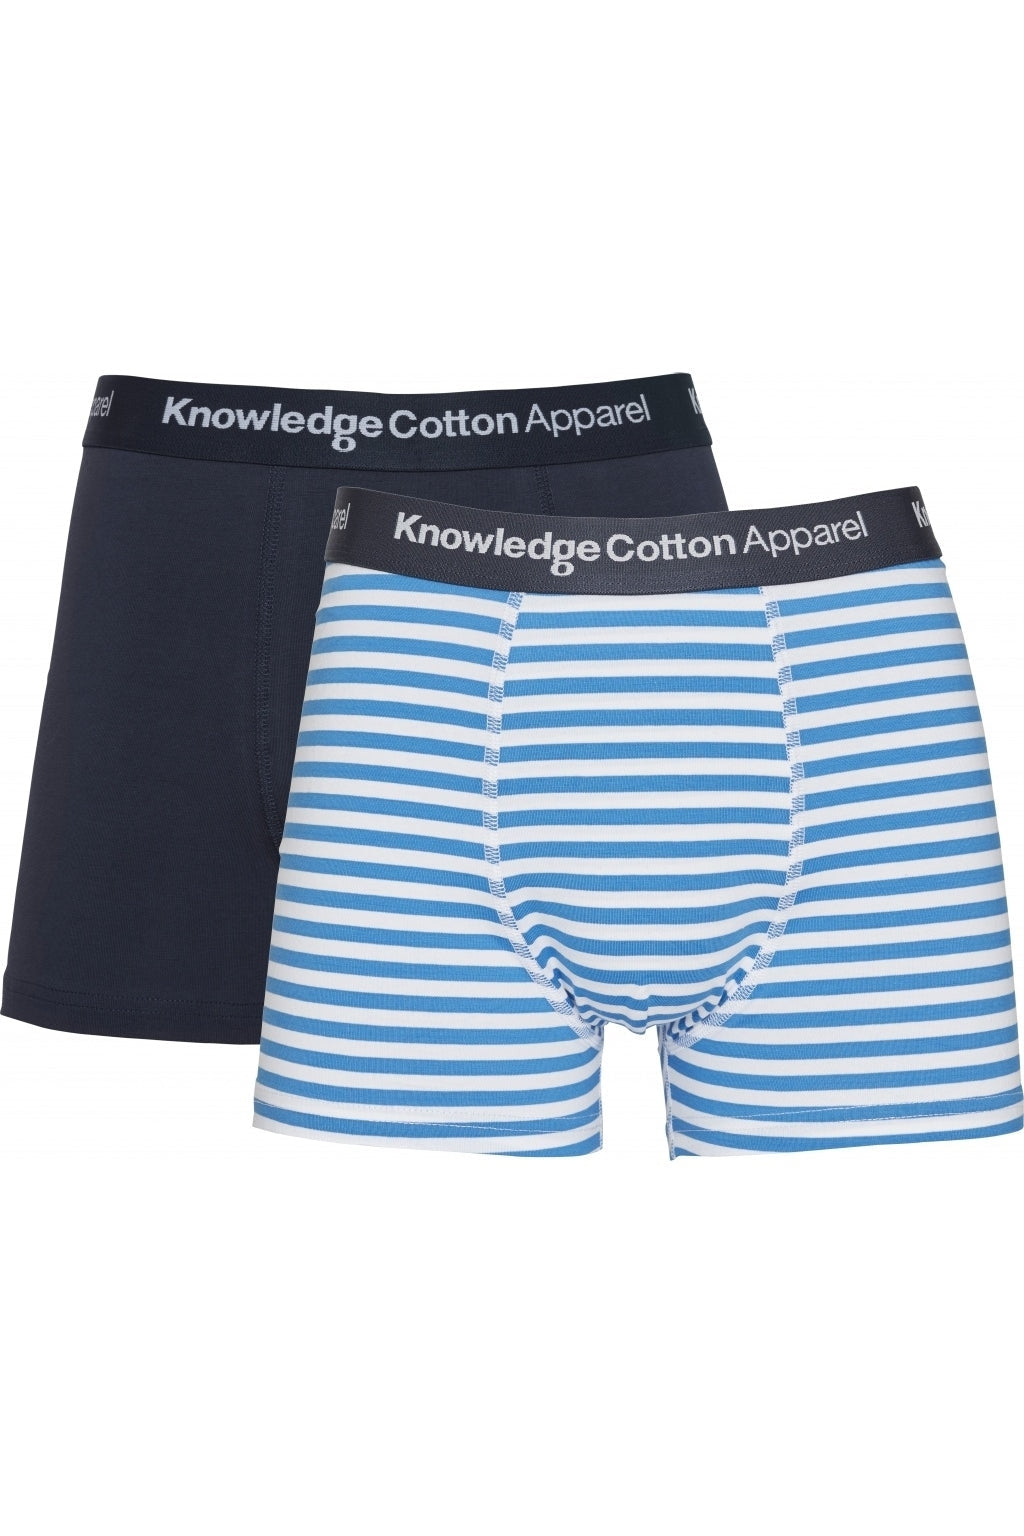 Knowledge Cotton 2 Pack Striped Underwear-Mens-Ohh! By Gum - Shop Sustainable